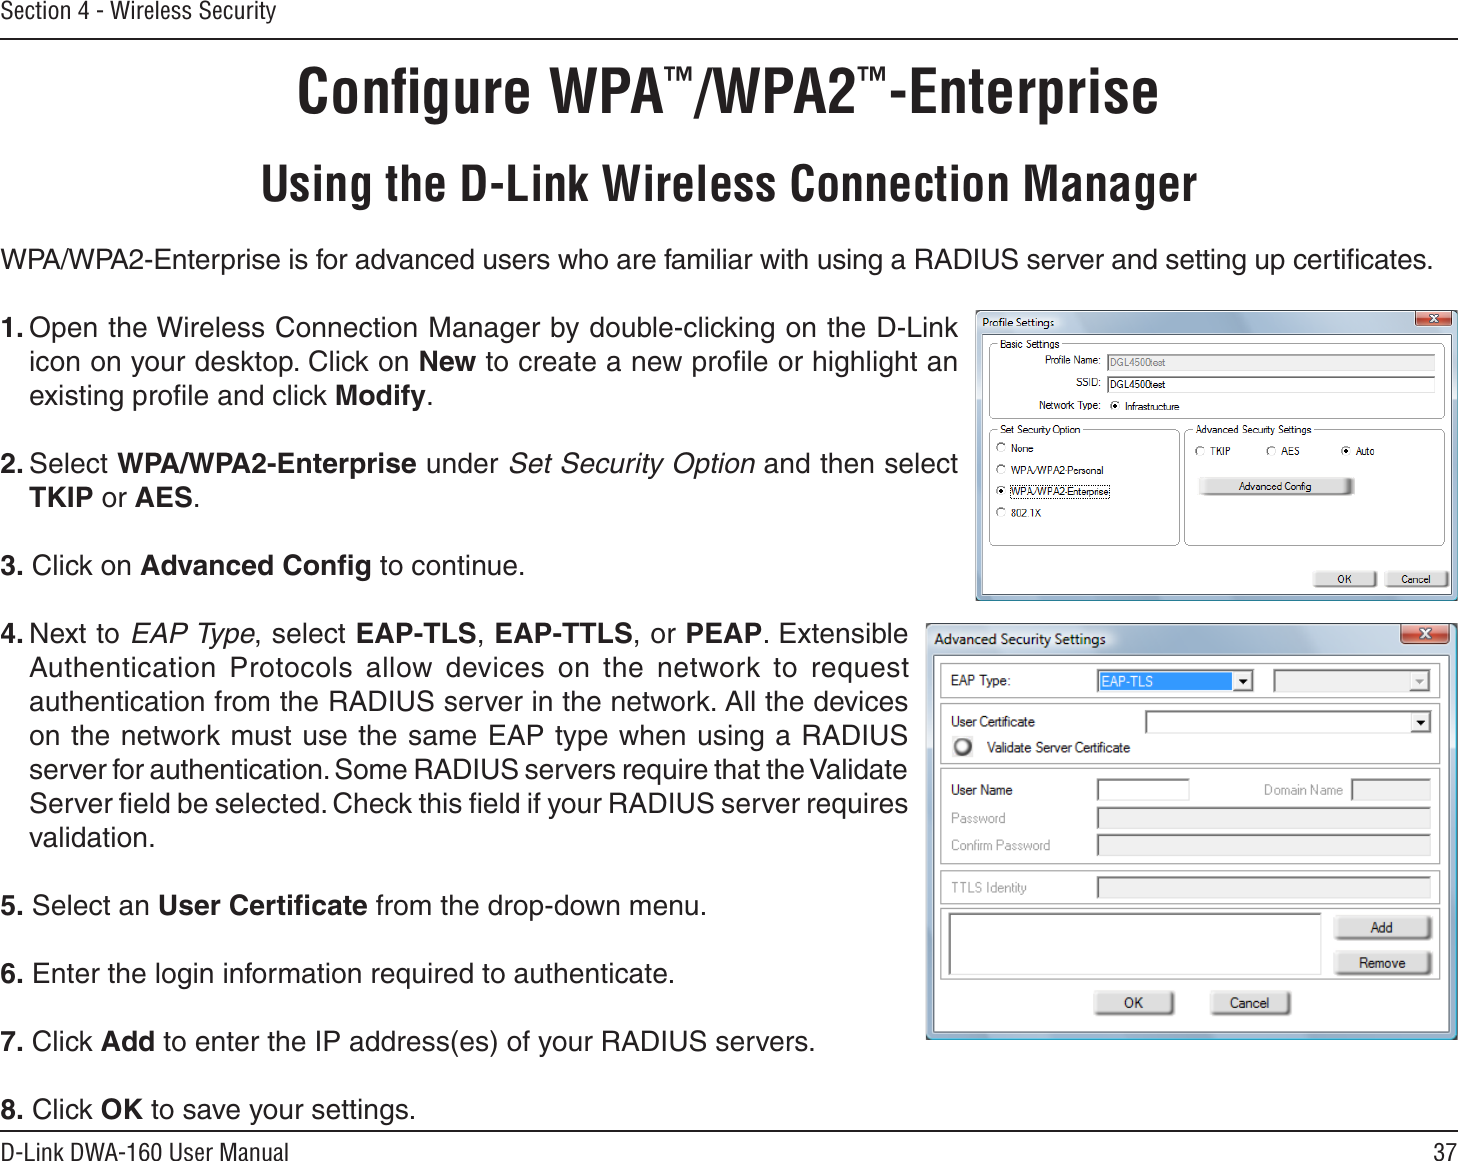 37D-Link DWA-160 User ManualSection 4 - Wireless SecurityConﬁgure WPA™/WPA2™-EnterpriseUsing the D-Link Wireless Connection ManagerWPA/WPA2-Enterprise is for advanced users who are familiar with using a RADIUS server and setting up certiﬁcates.1. Open the Wireless Connection Manager by double-clicking on the D-Link icon on your desktop. Click on New to create a new proﬁle or highlight an existing proﬁle and click Modify. 2. Select WPA/WPA2-Enterprise under Set Security Option and then select TKIP or AES.3. Click on Advanced Conﬁg to continue.4. Next to EAP Type, select EAP-TLS,EAP-TTLS, or PEAP. Extensible Authentication Protocols allow devices on the network to request authentication from the RADIUS server in the network. All the devices on the network must use the same EAP type when using a RADIUS server for authentication. Some RADIUS servers require that the Validate Server ﬁeld be selected. Check this ﬁeld if your RADIUS server requires validation.5. Select an User Certiﬁcate from the drop-down menu.6. Enter the login information required to authenticate.7. Click Add to enter the IP address(es) of your RADIUS servers.8. Click OK to save your settings.